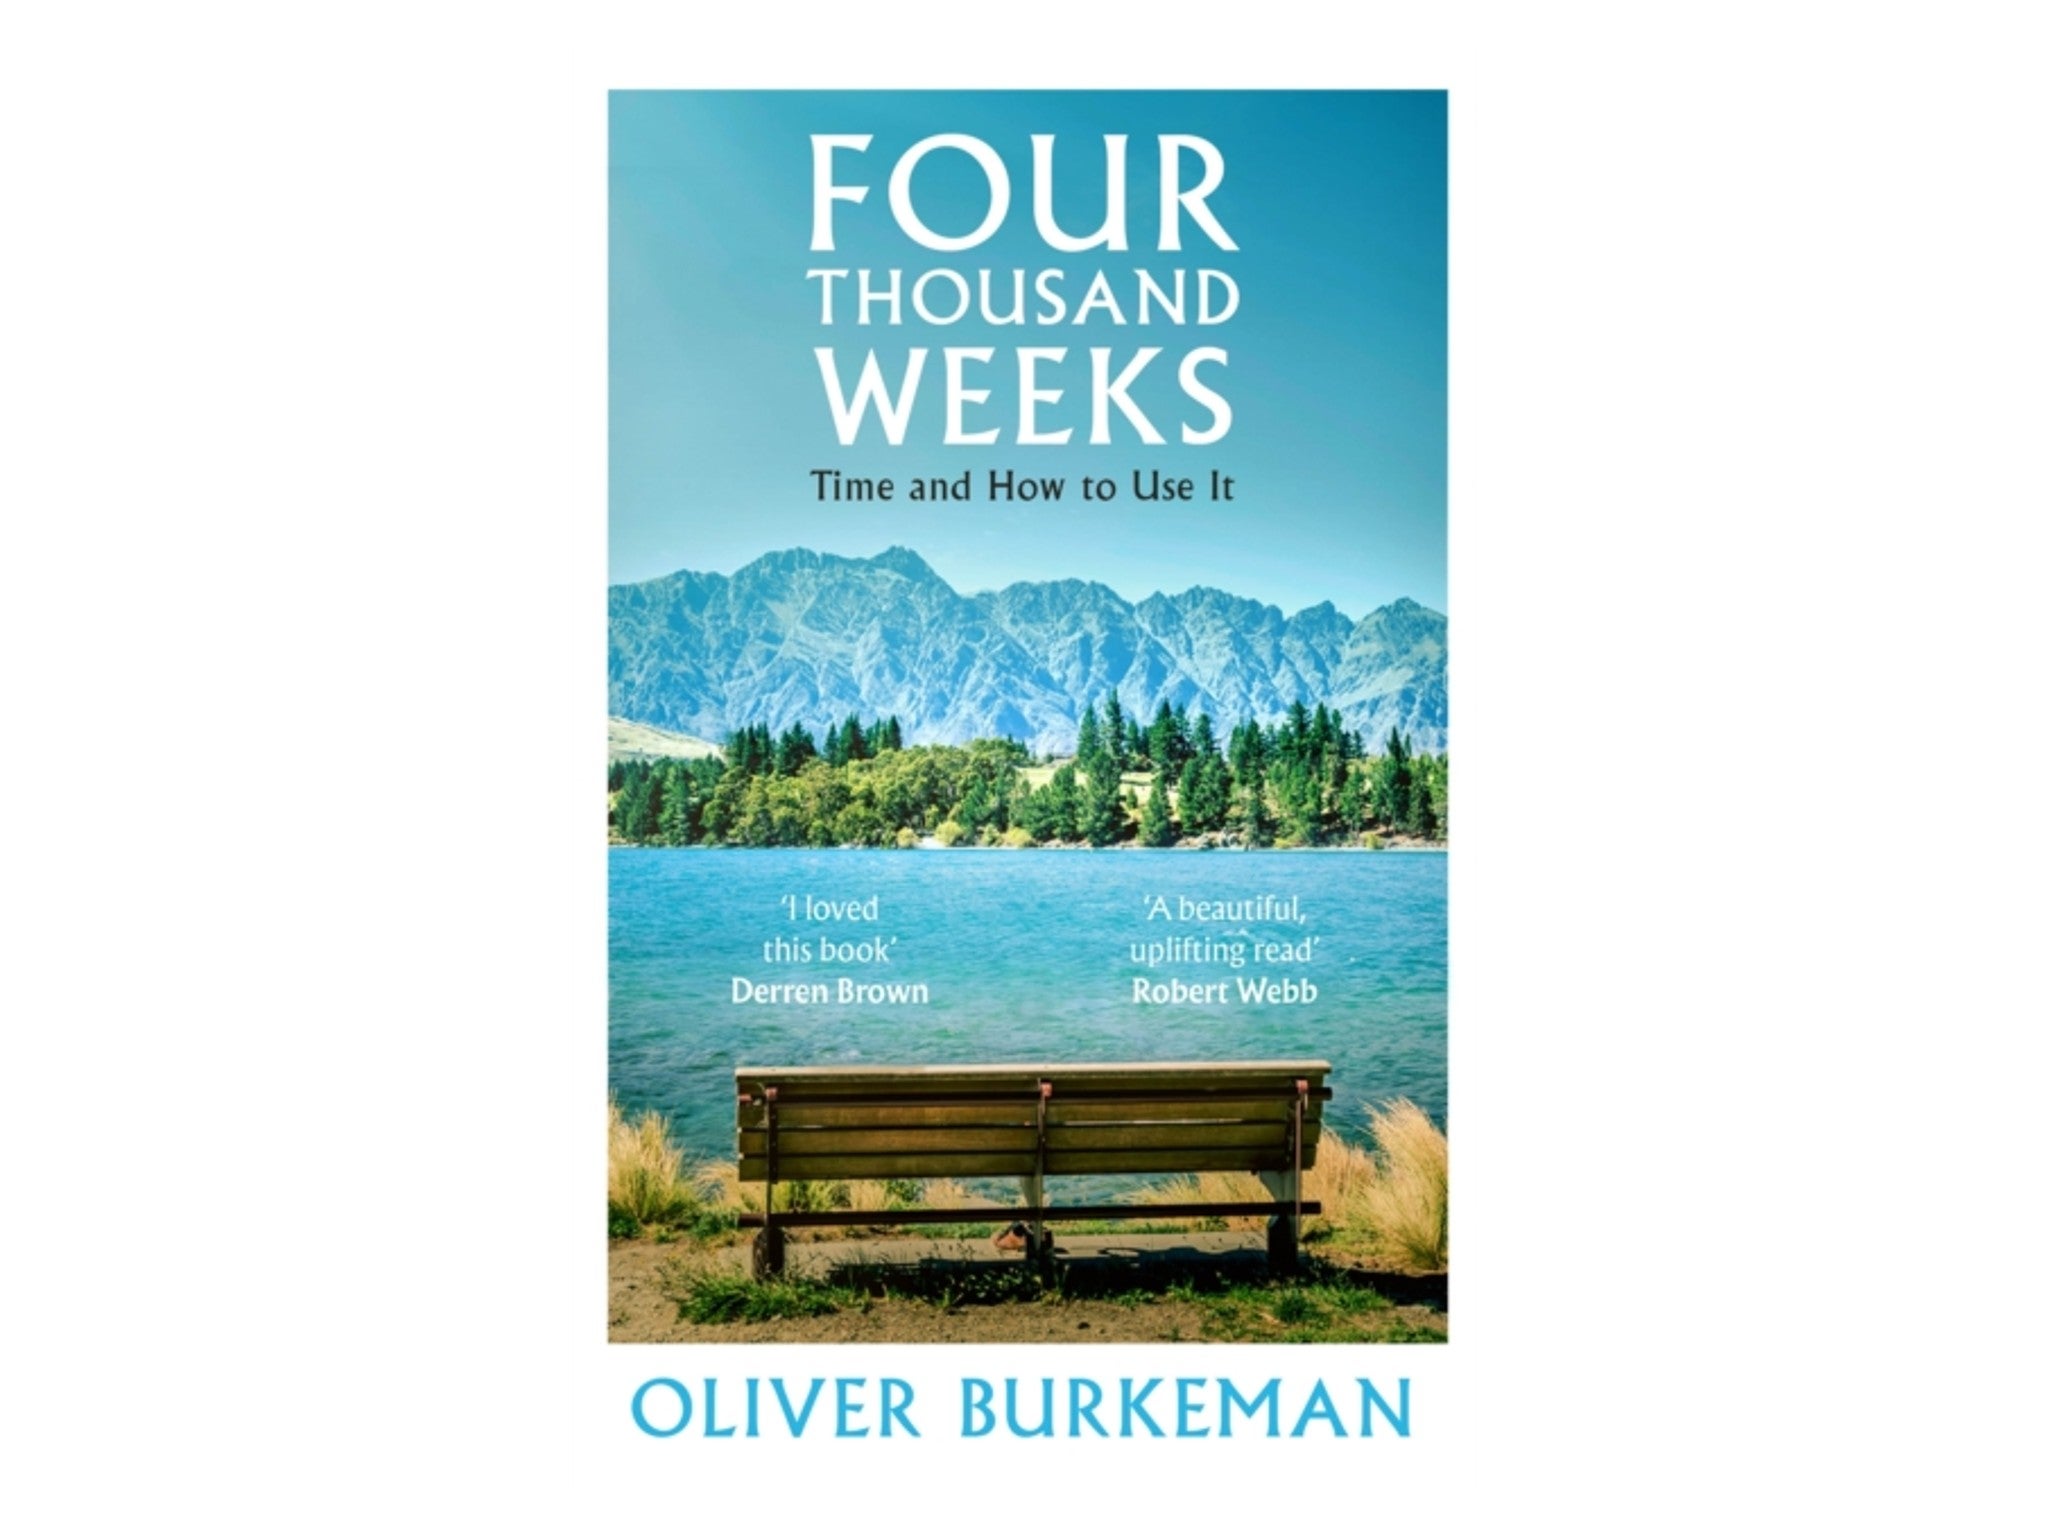 ‘Four Thousand Weeks- Time and How to Use It’ by Oliver Burkeman, published by Vintage indybest.jpg